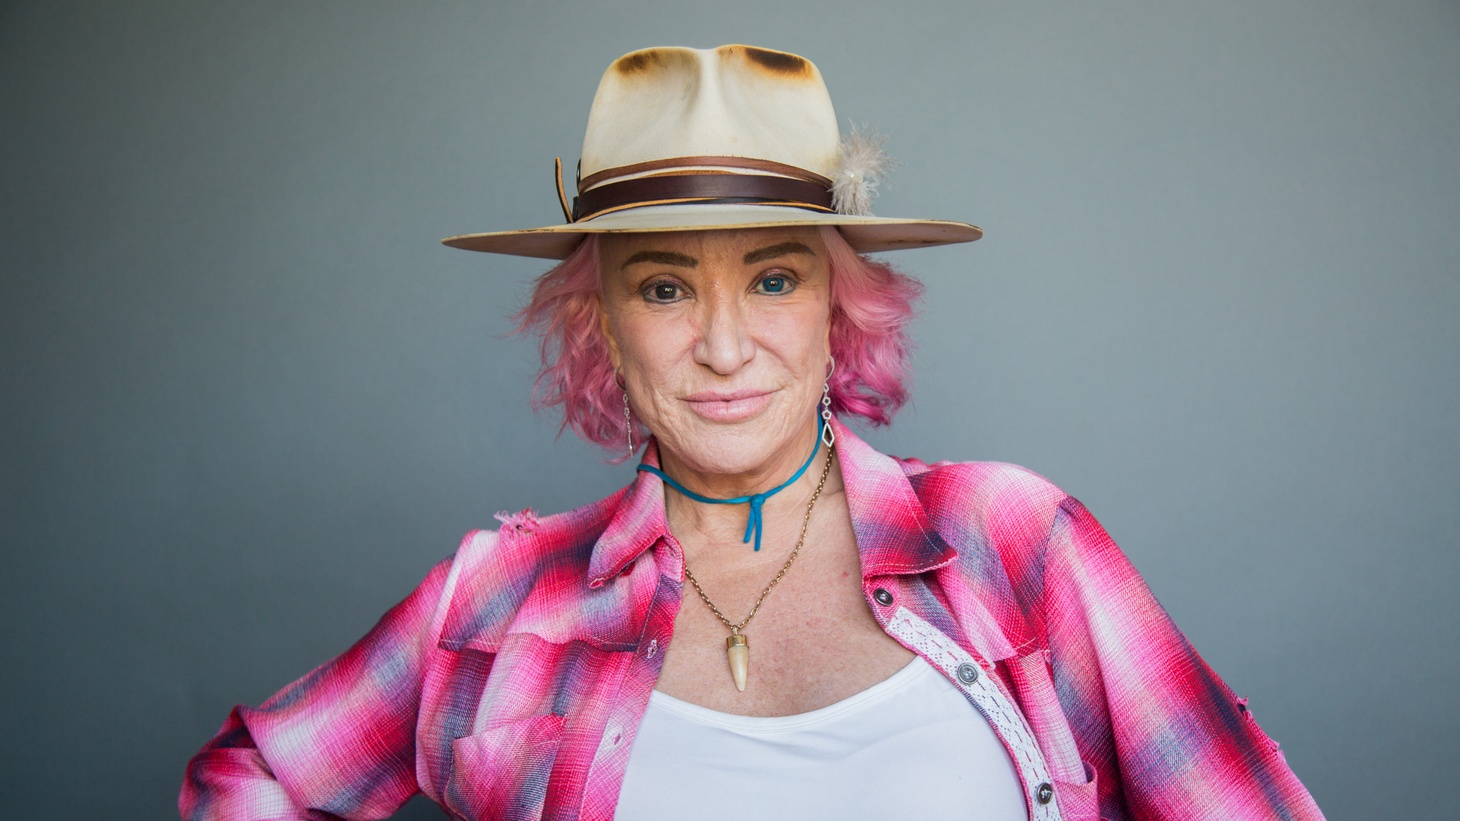 Country star Tanya Tucker on her first album in nearly 20 years | KCRW1460 x 821